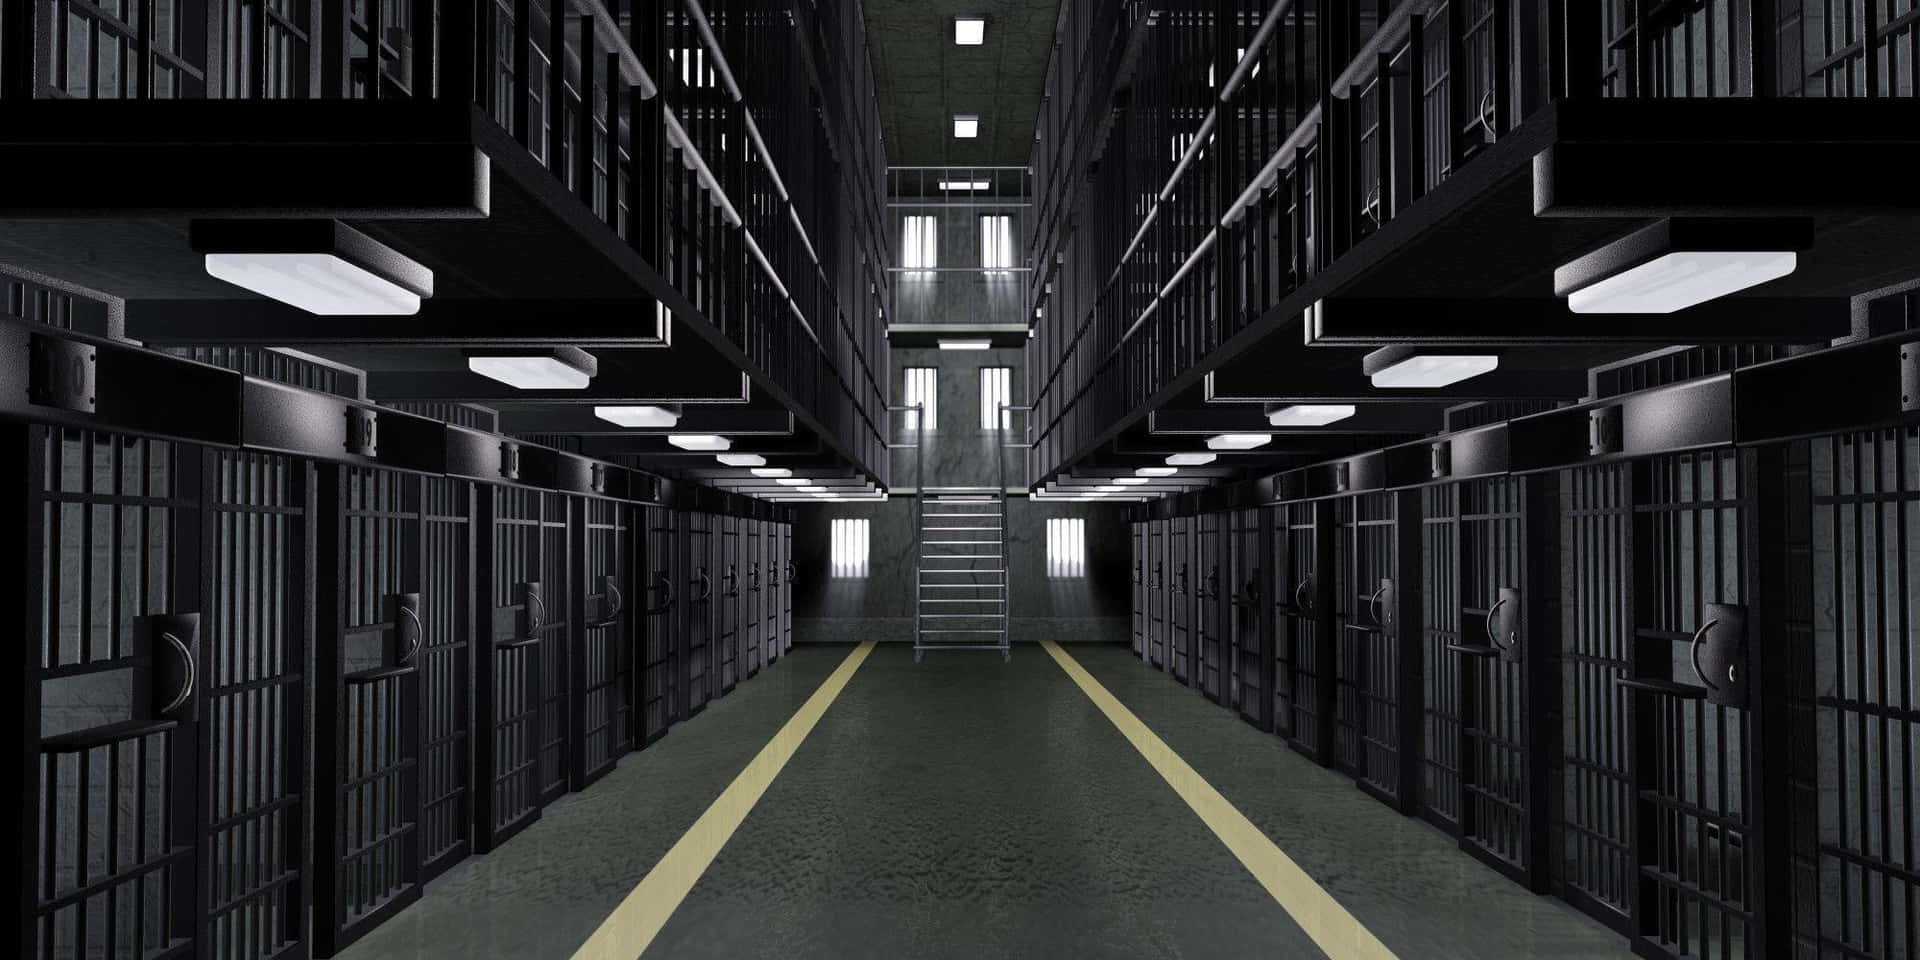 An Illuminated Prison Cell in the Dark